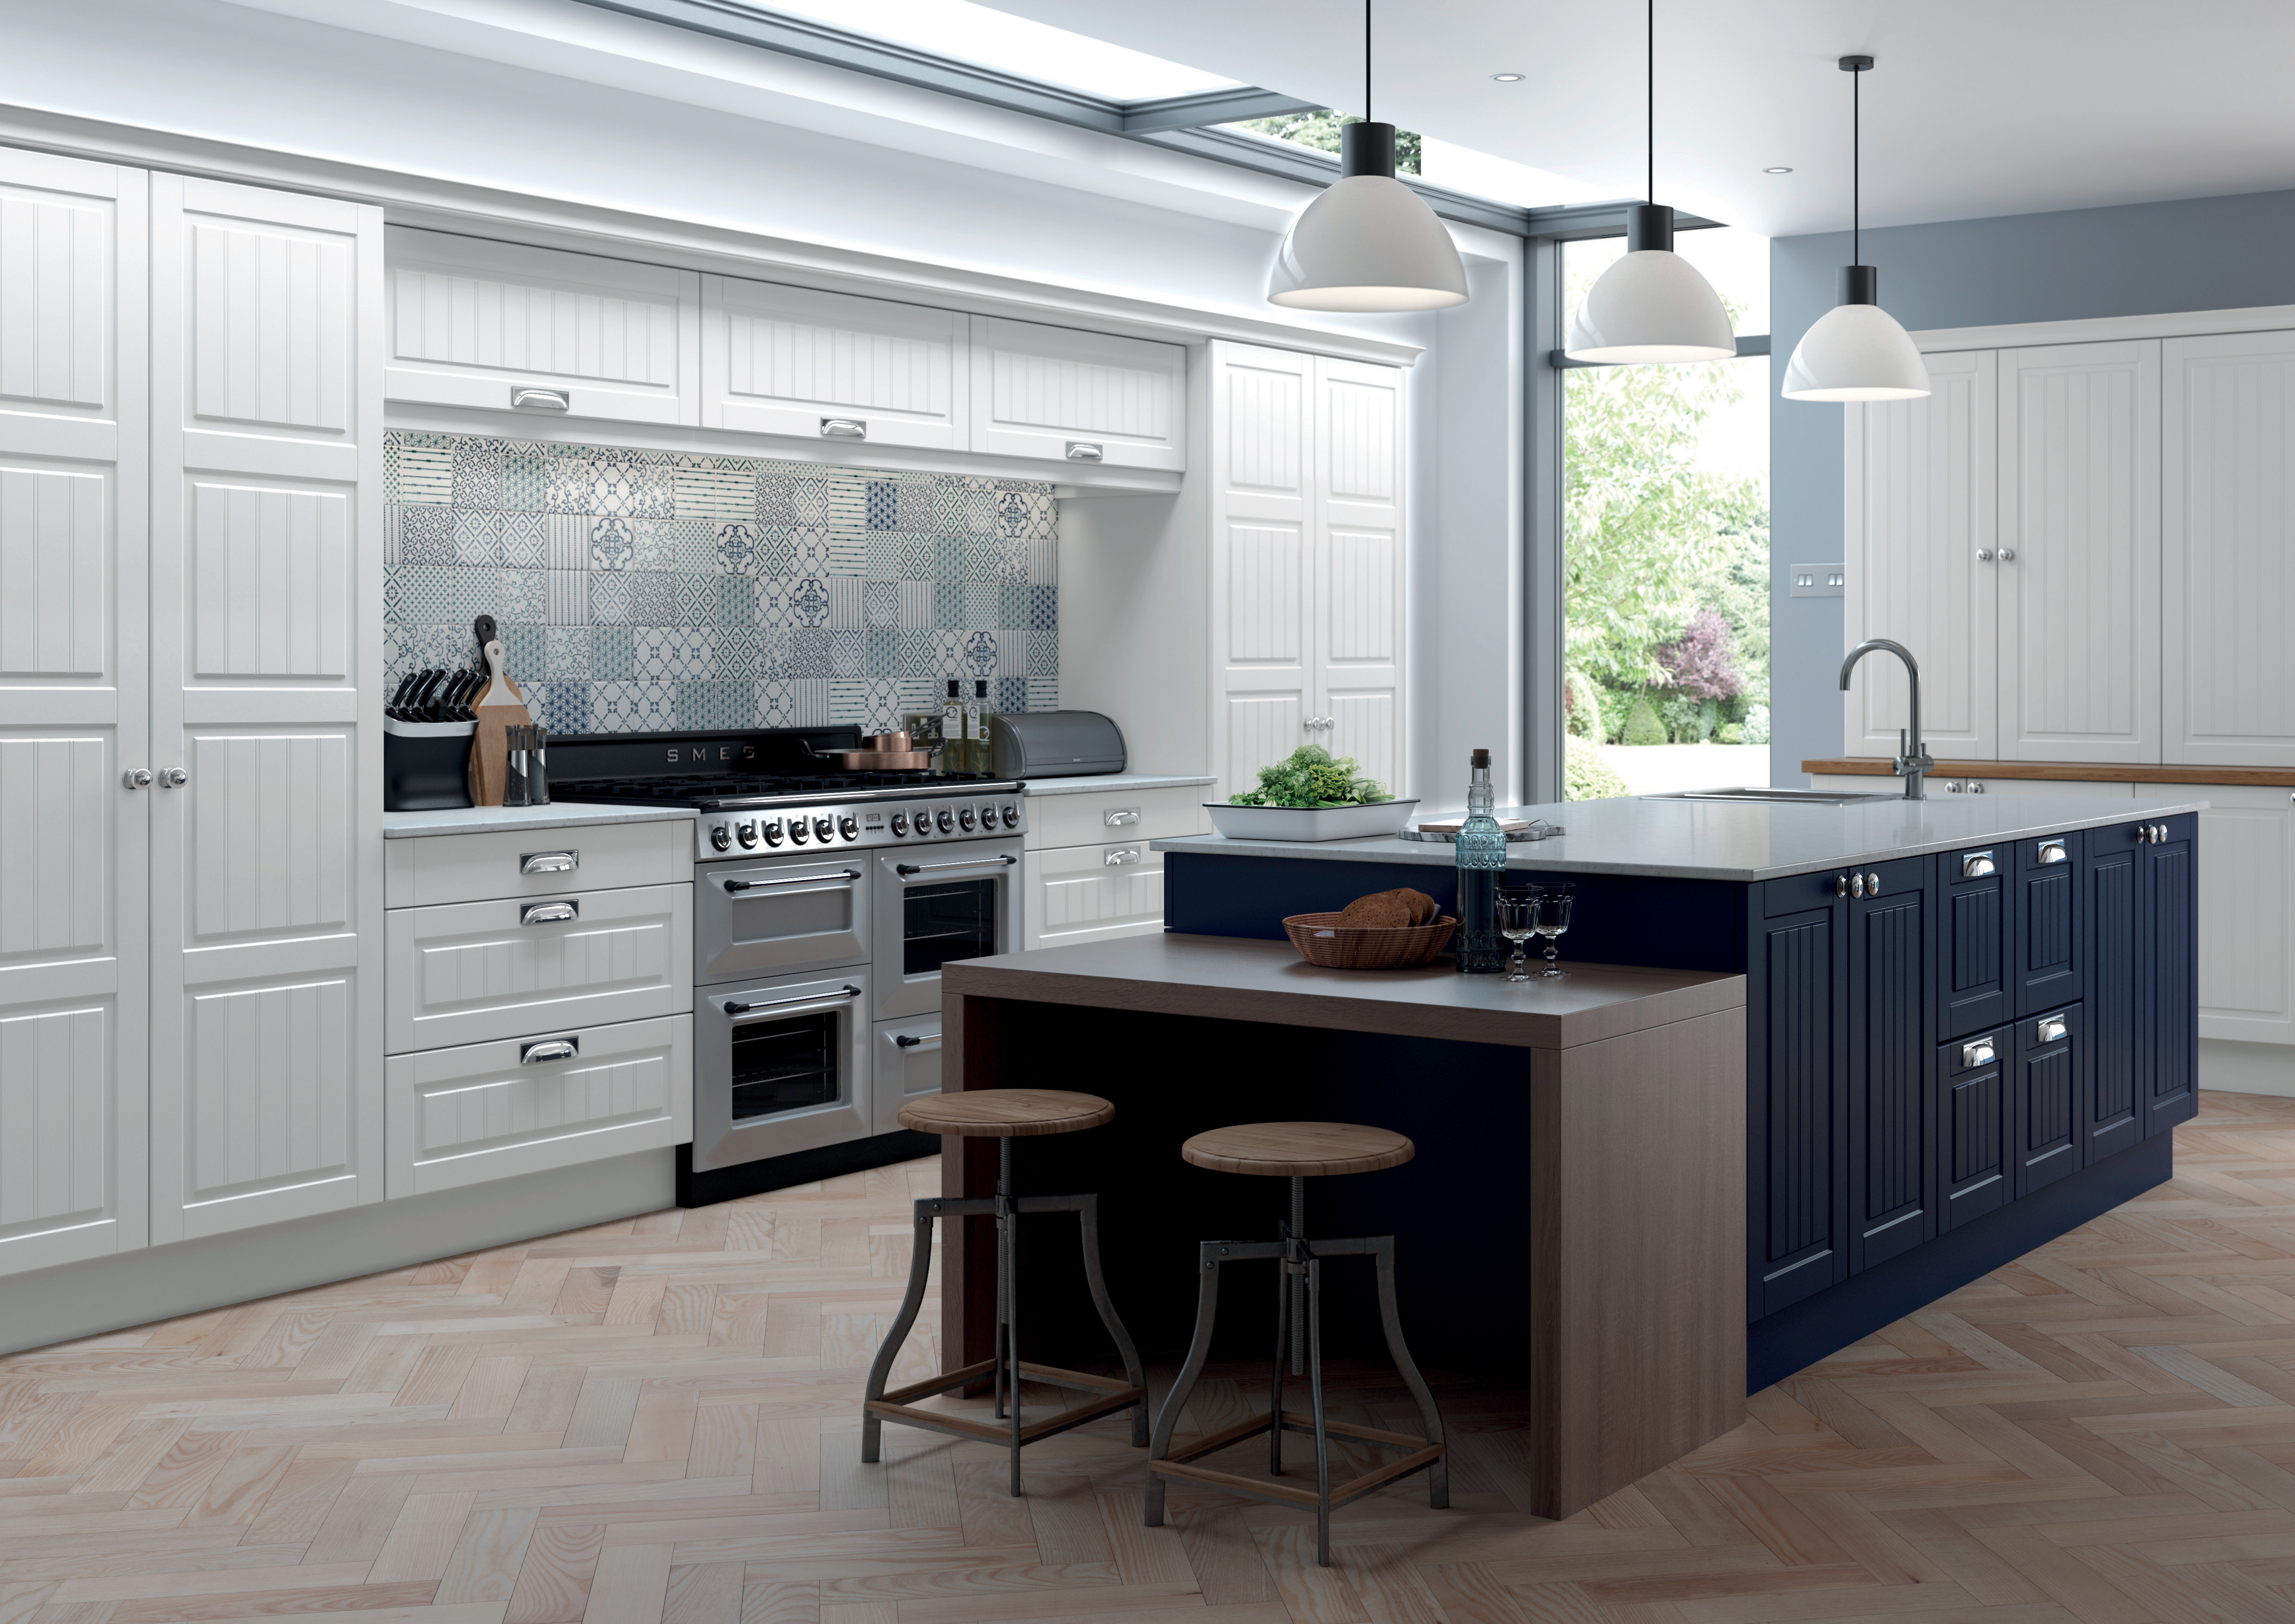 Grooved Kitchens